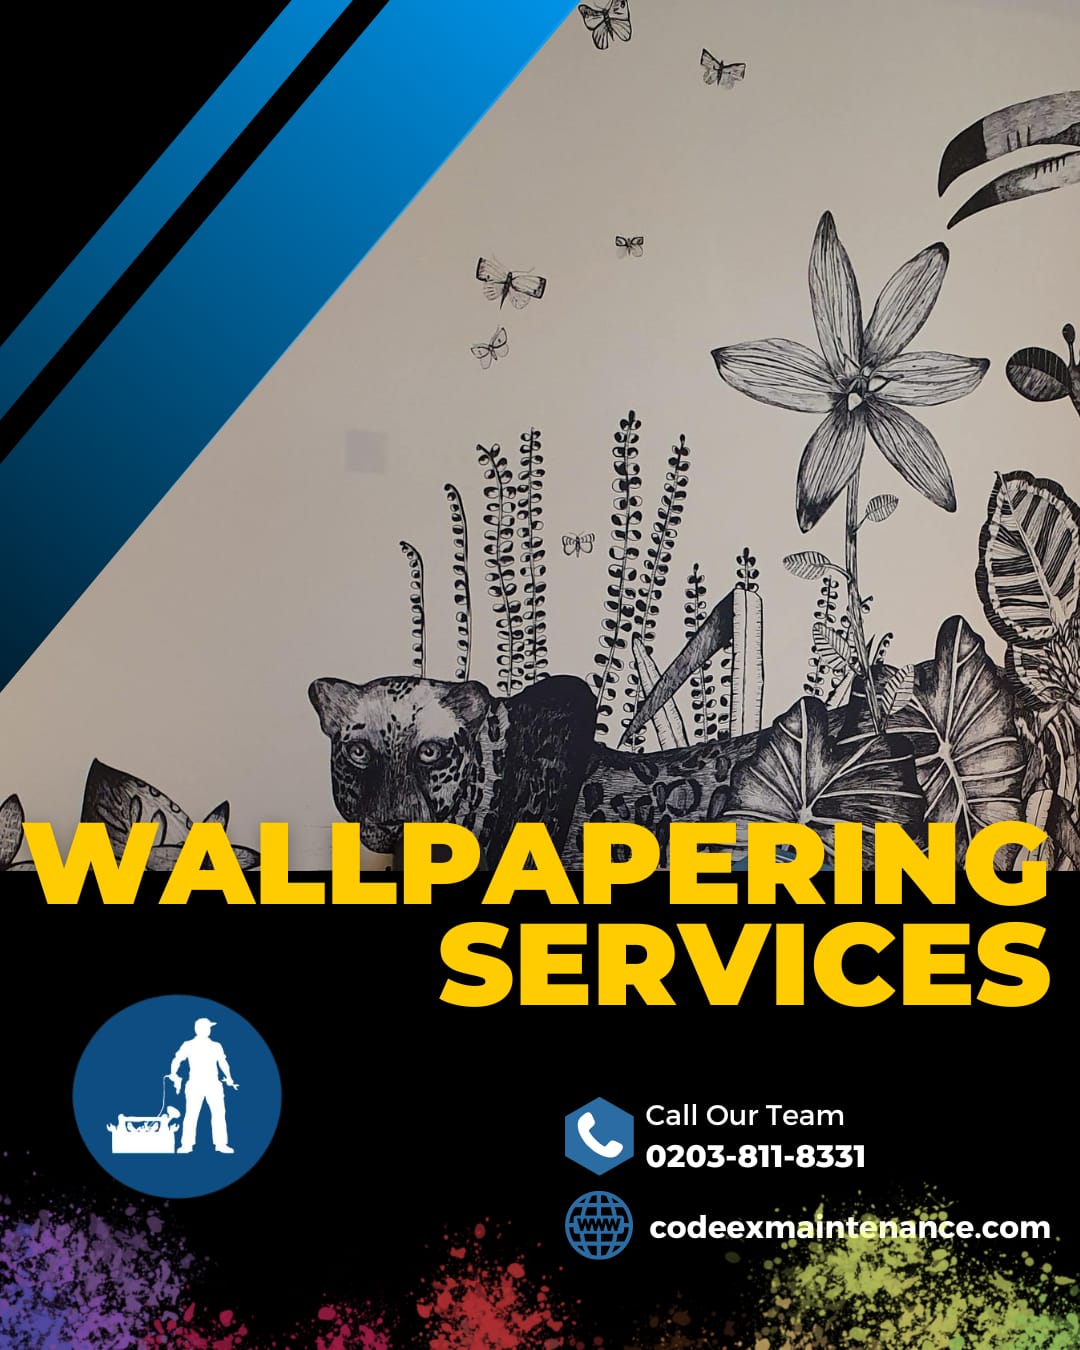 WALLPAPERING SERVICES